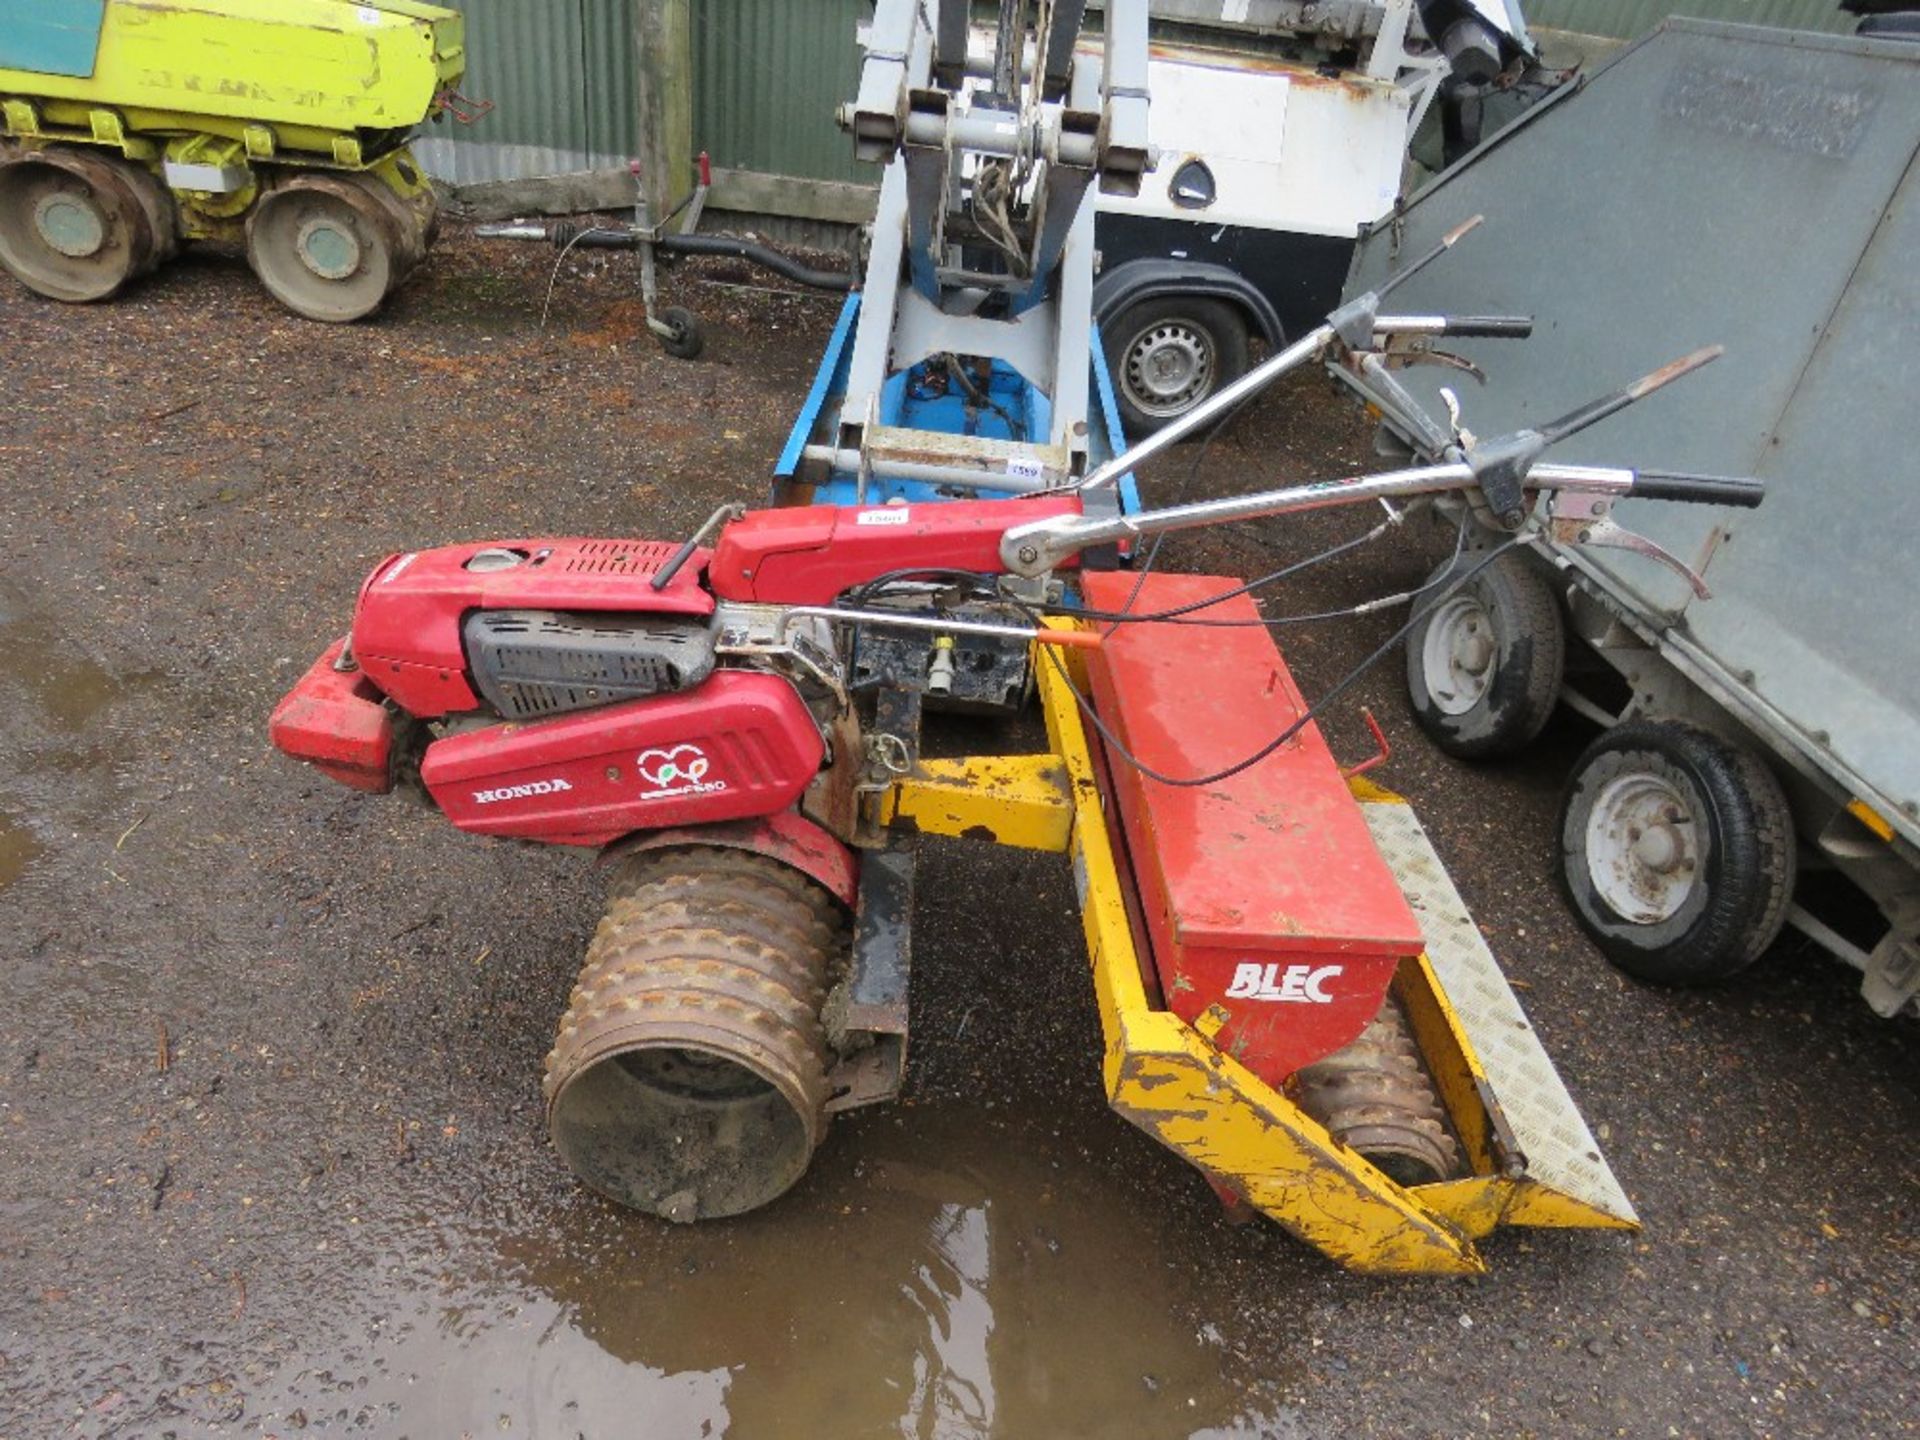 BLEC CP36 SEEDER UNIT MOUNTED ON HONDA F660 DRIVE UNIT, SOURCED FROM LIQUIDATION. NO PULL CORD SO UN